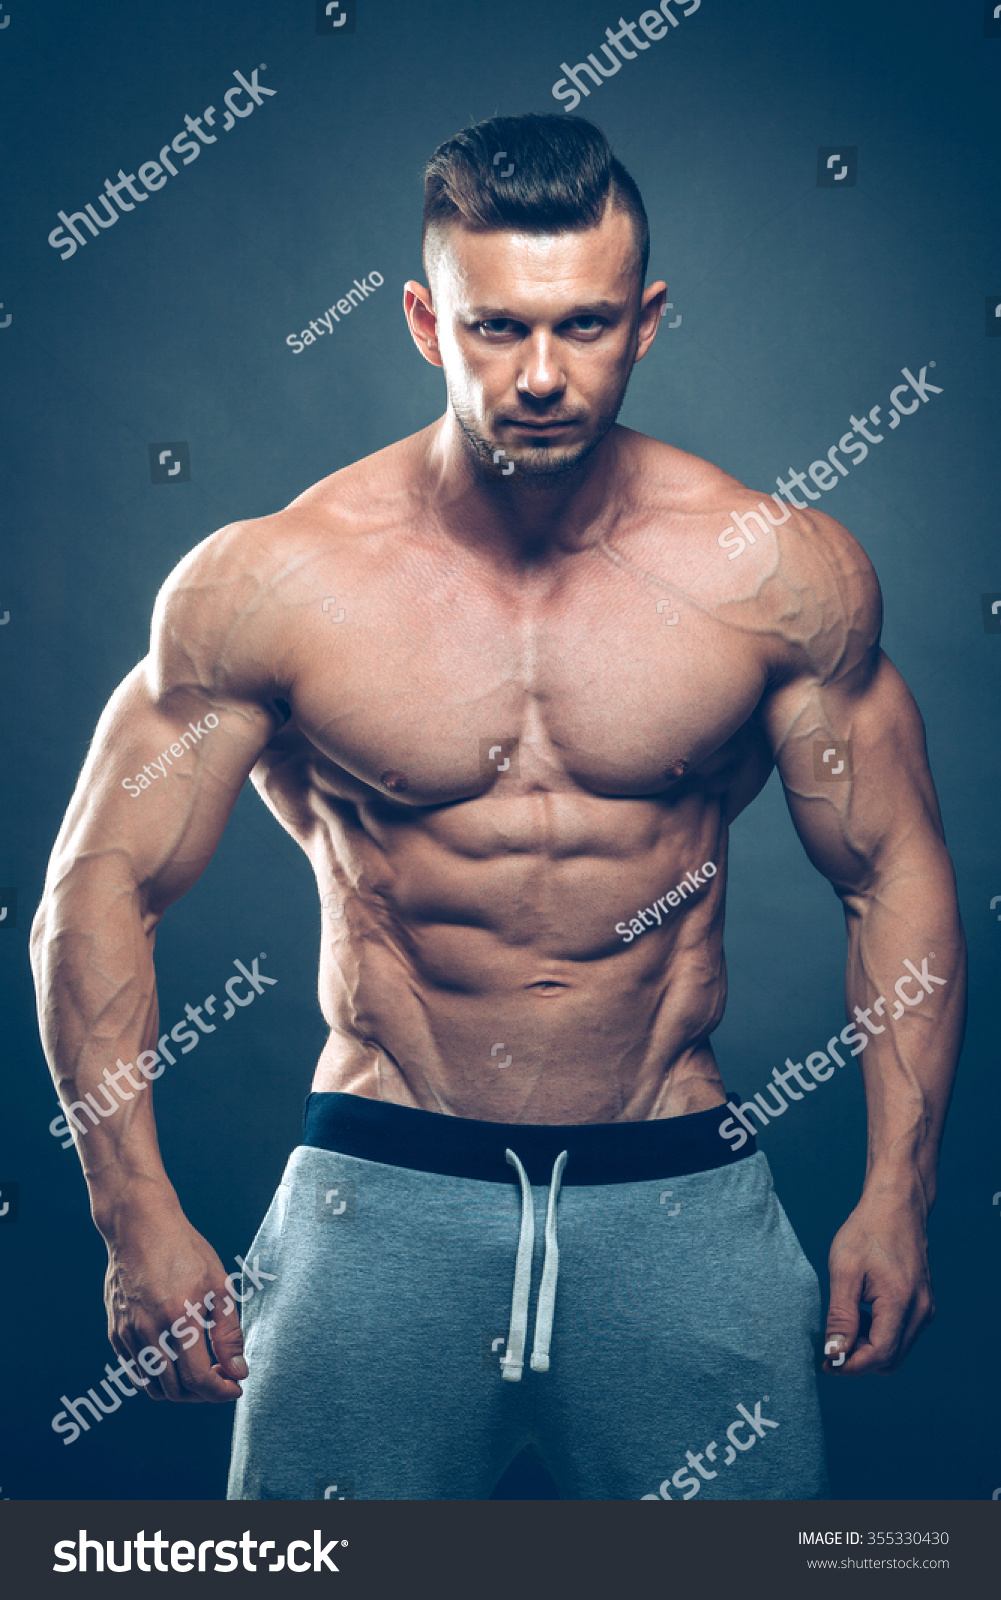 Strong Athletic Man Fitness Model Torso Showing Six Pack Abs. Isolated ...